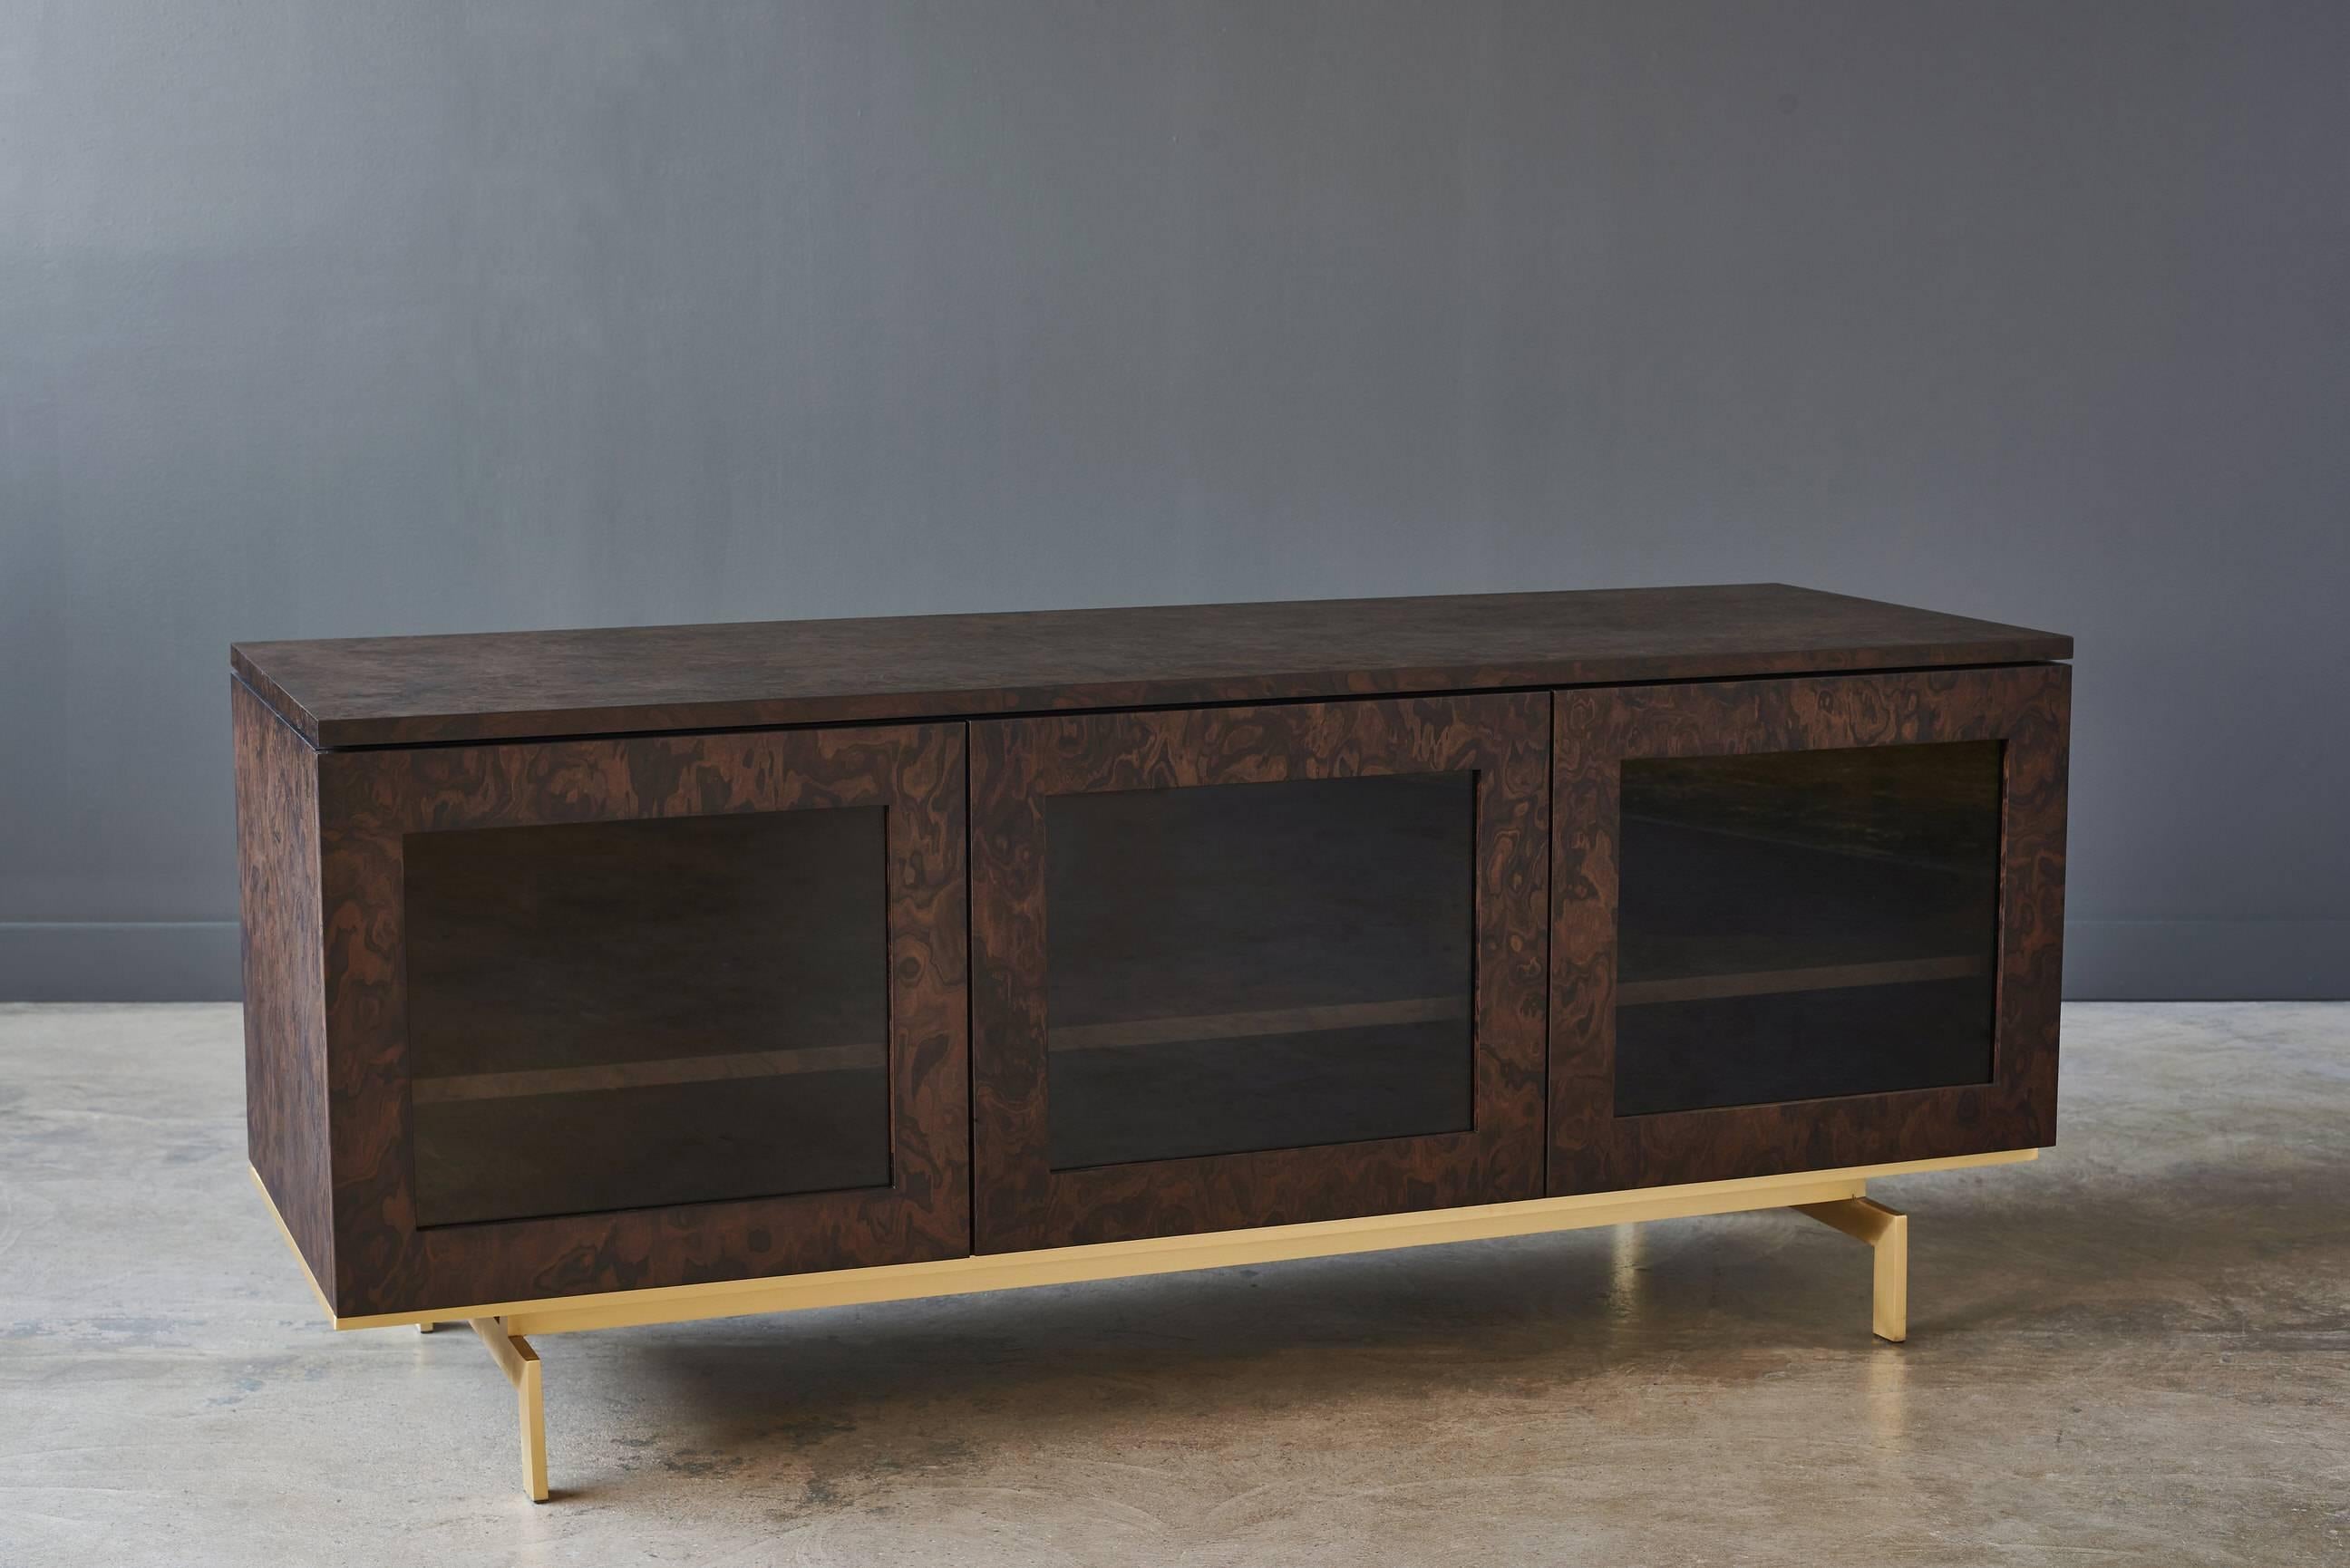 Elevate your home with the clean lines of our Darin Credenza. It is handcrafted with burled walnut, brass and clear glass front.

Shown in burled walnut case, matte brass base and clear glass. Measures: 63in x 22in x 26in H.

Each Desiron piece is